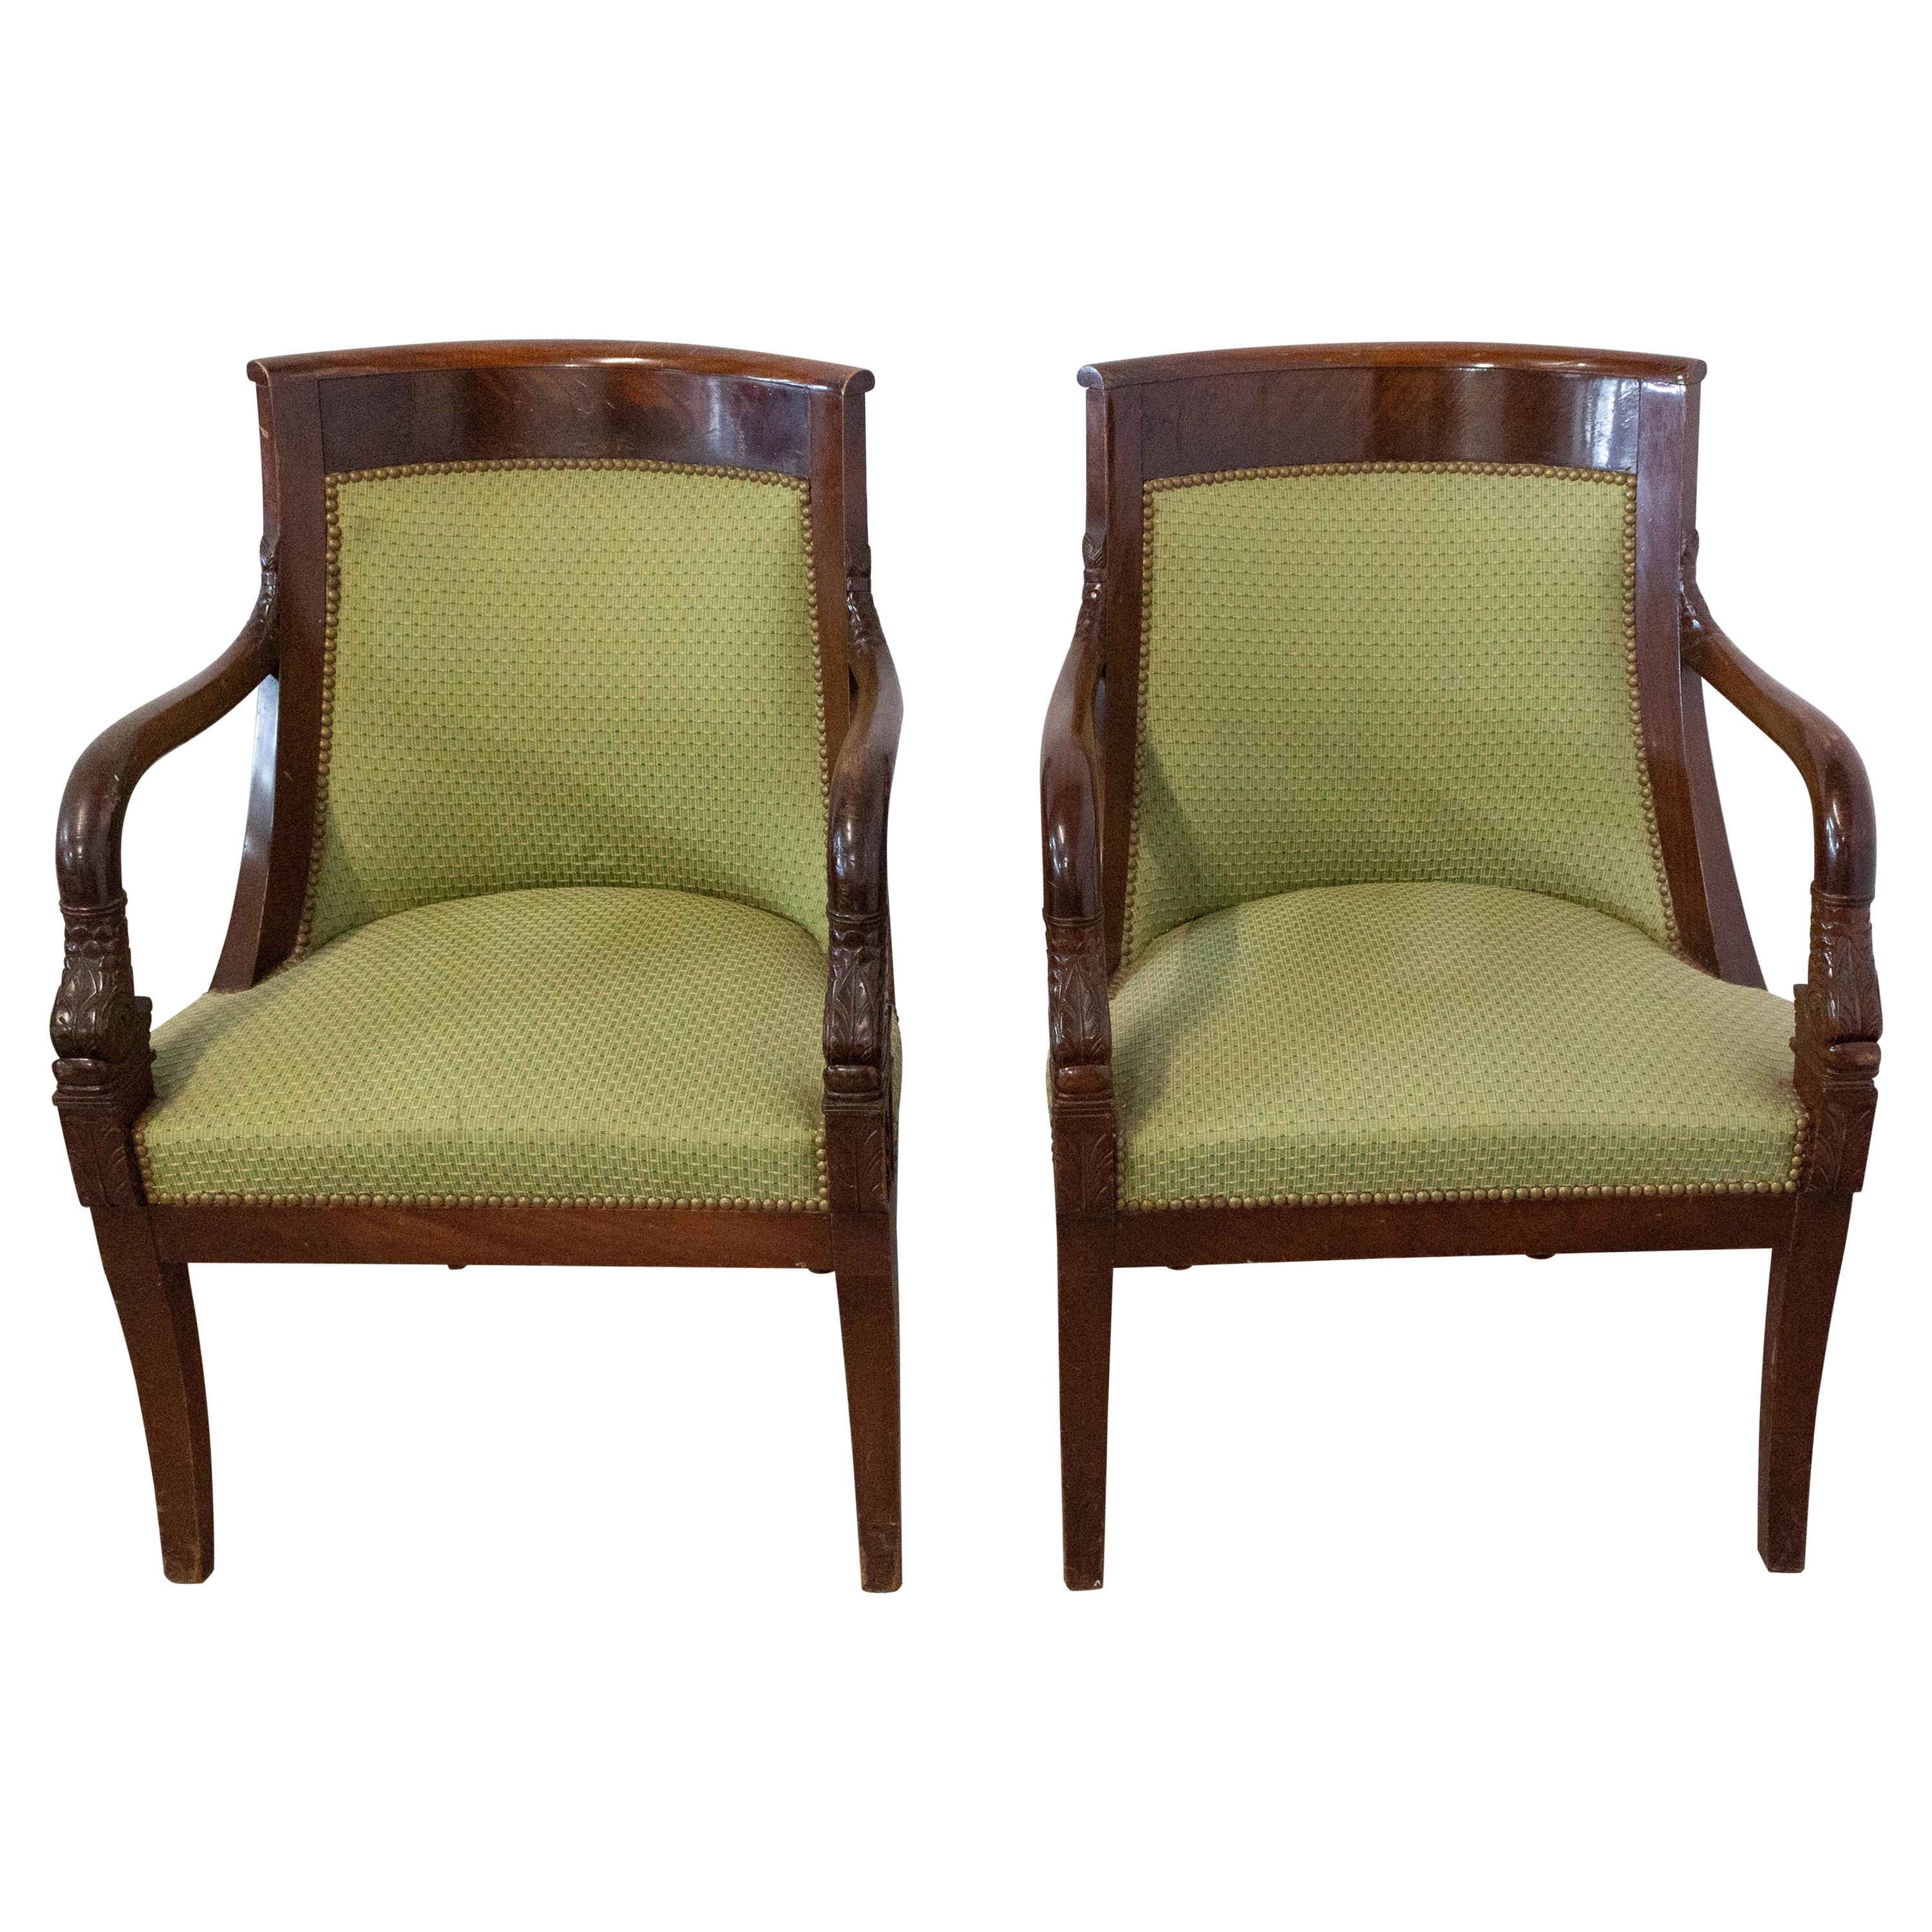 Pair of Empire Armchairs Mahogany Desk Chairs French 20th Century to Recover